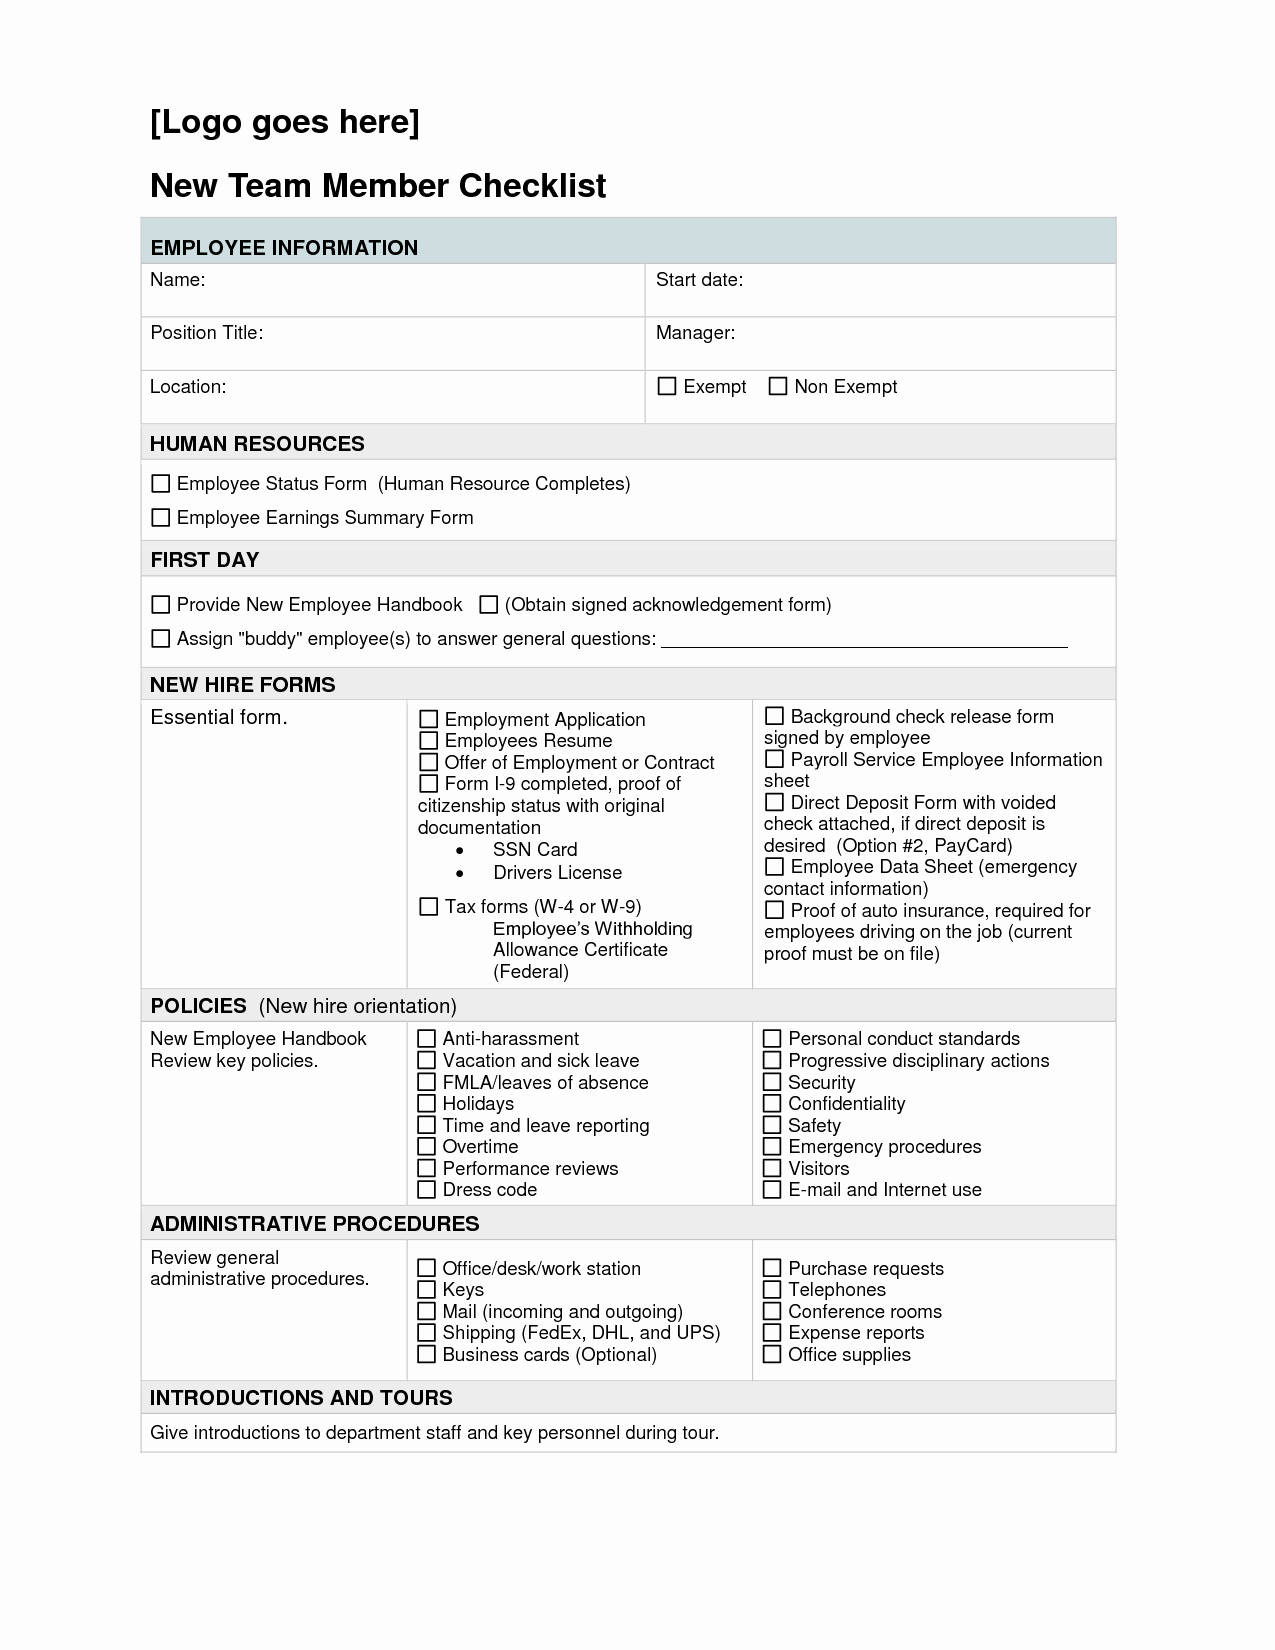 New Hire Checklist Template Awesome New Hire Checklist Full Version